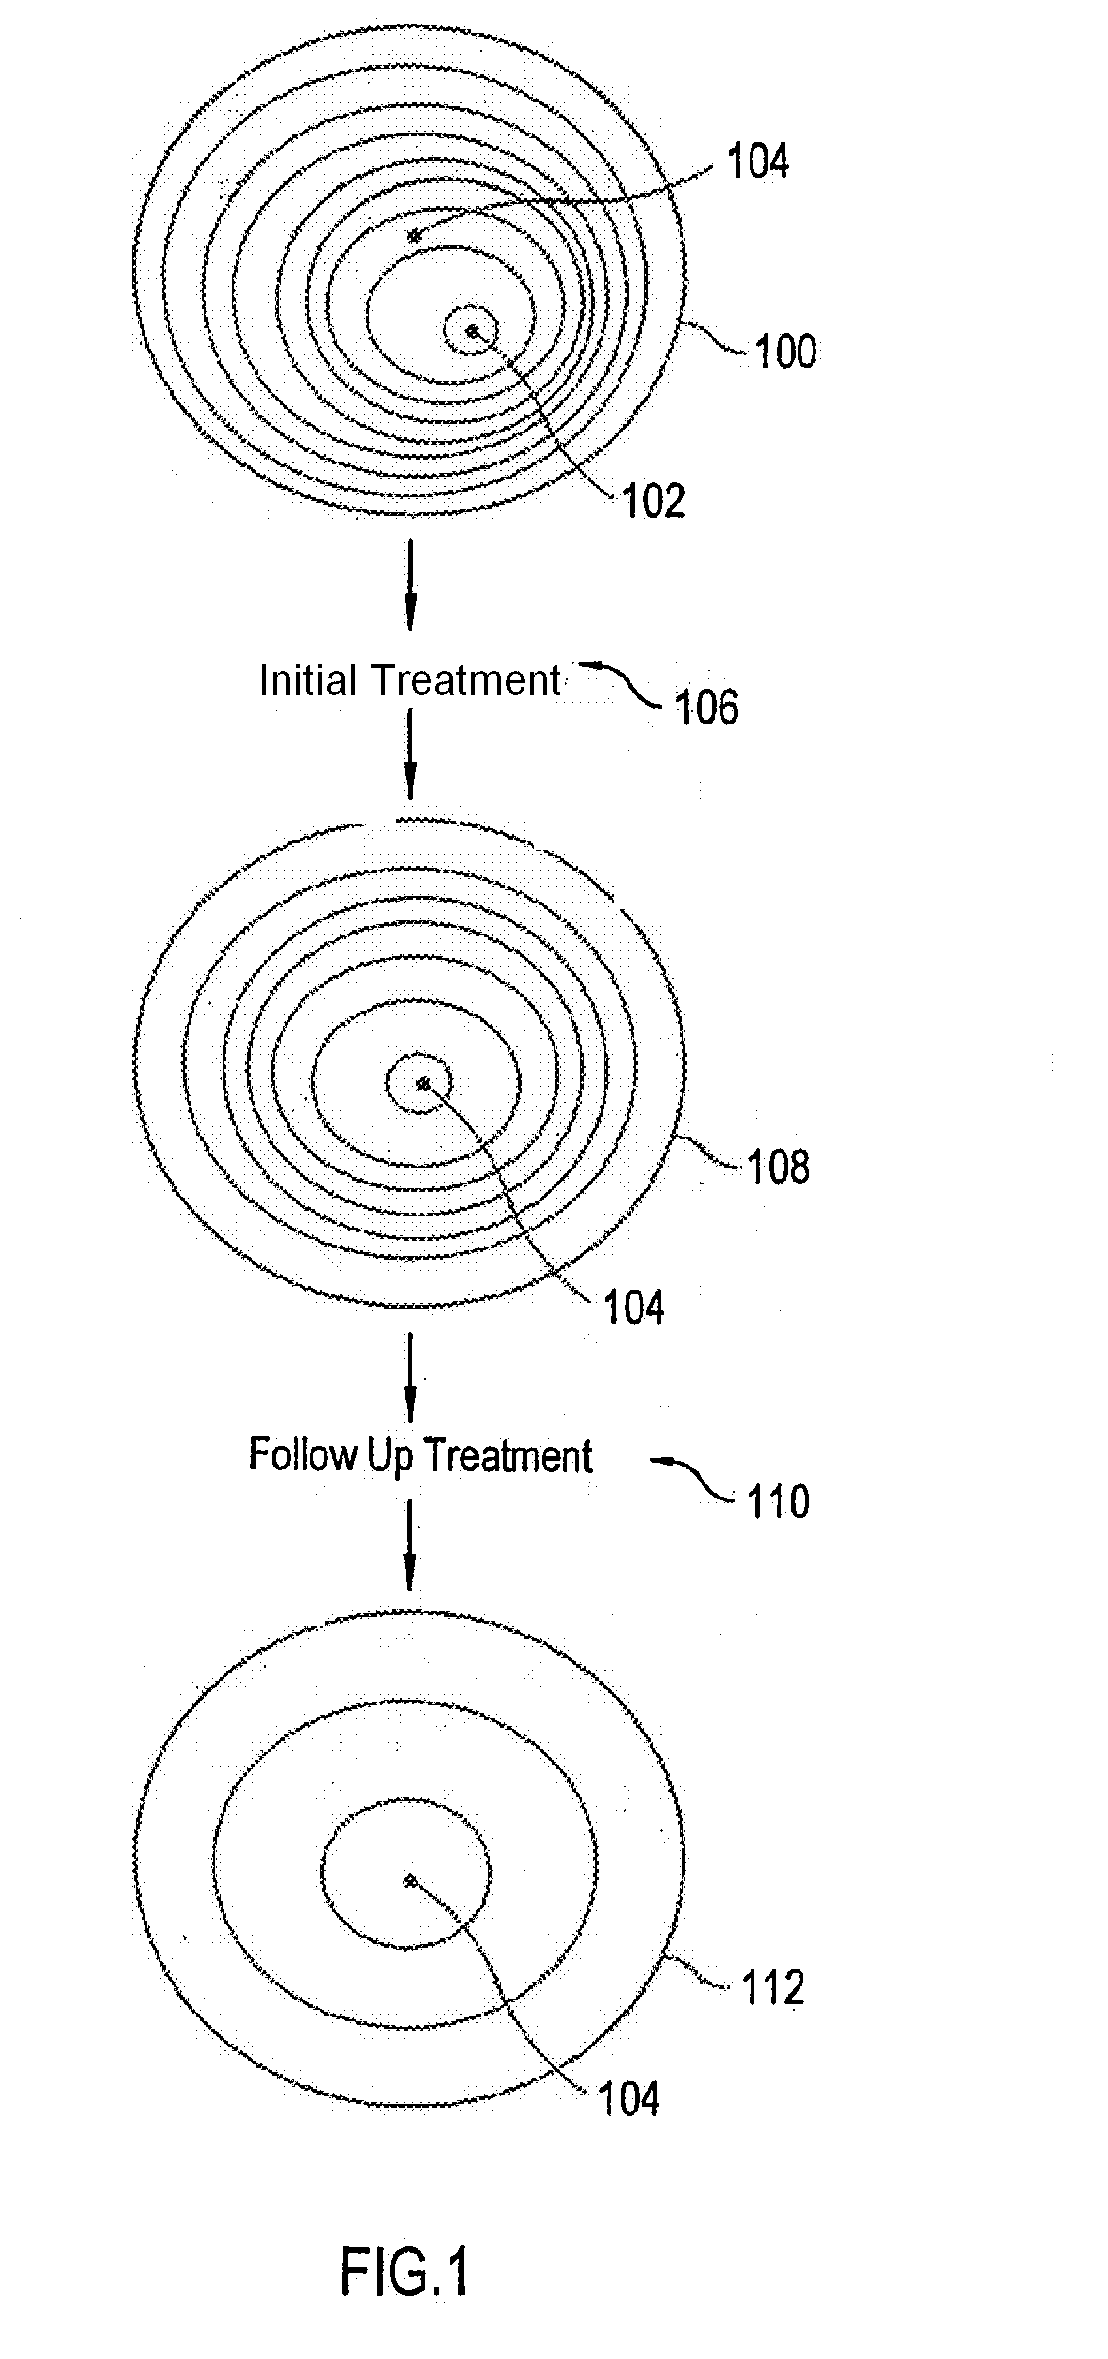 Method and Apparatus for Multi-Step Correction of Ophthalmic Refractive Errors